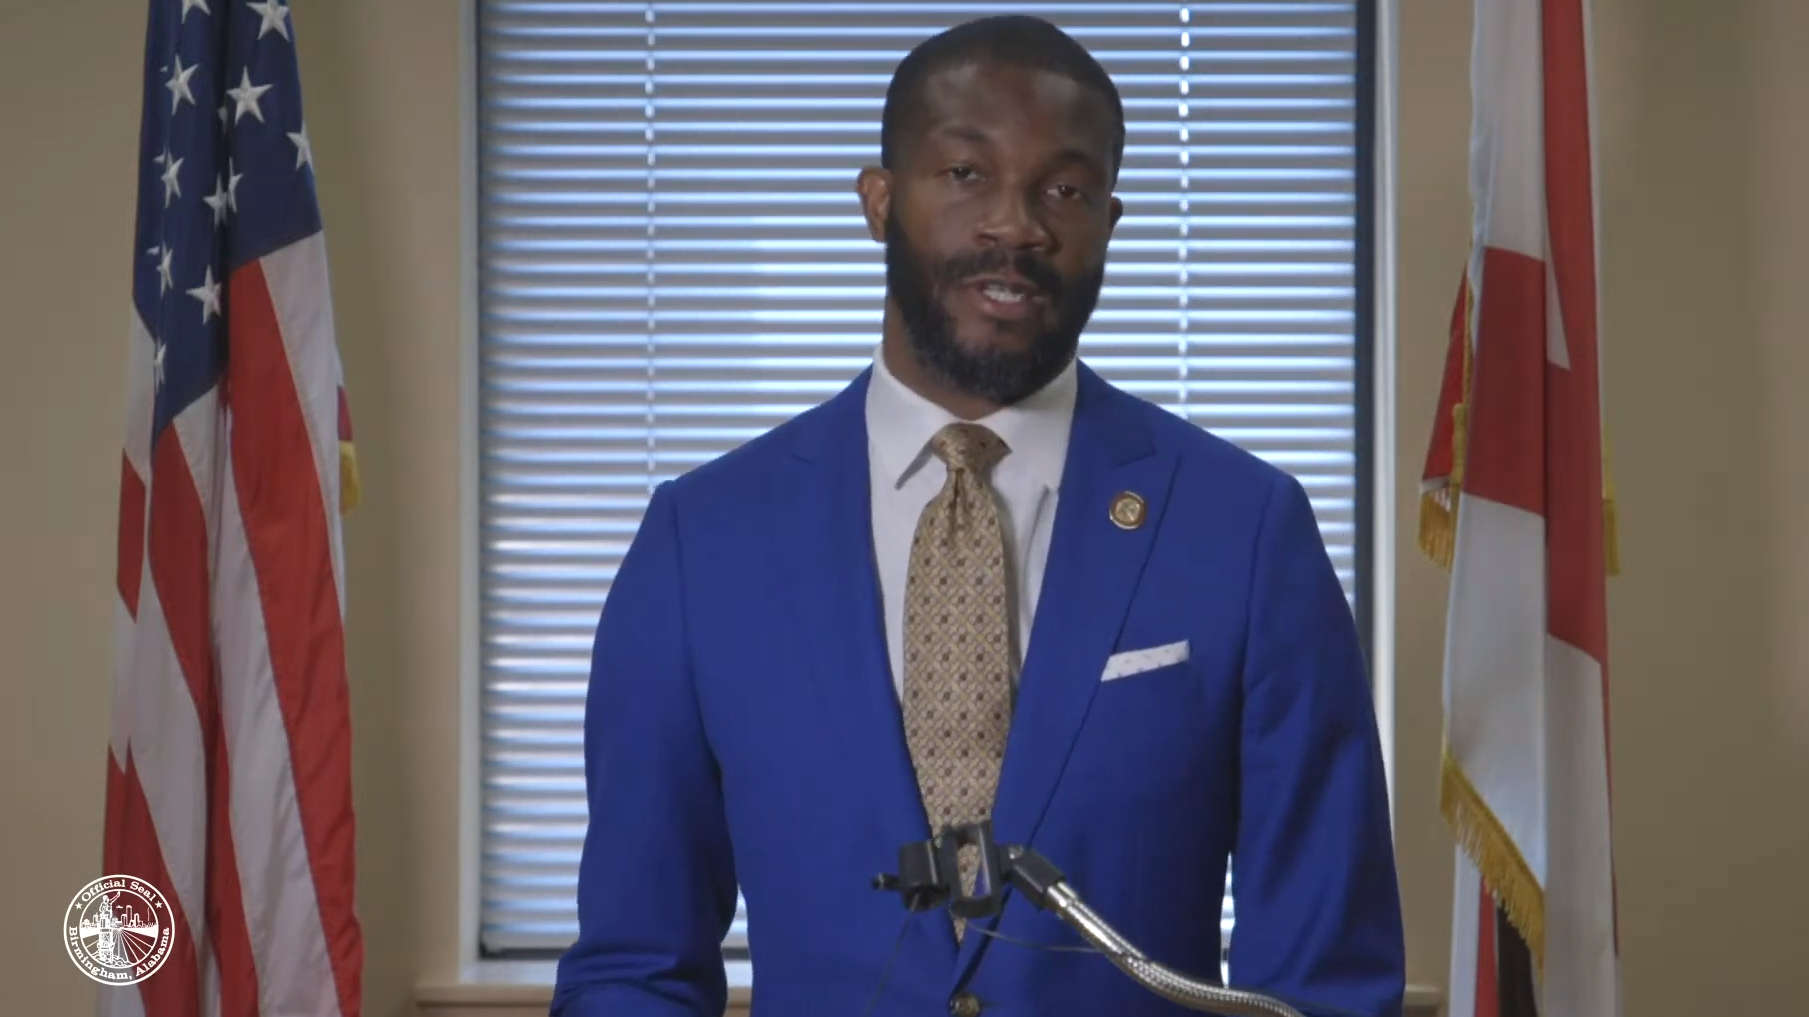 Birmingham Mayor Randall Woodfin speaks during a livestreamed press conference.